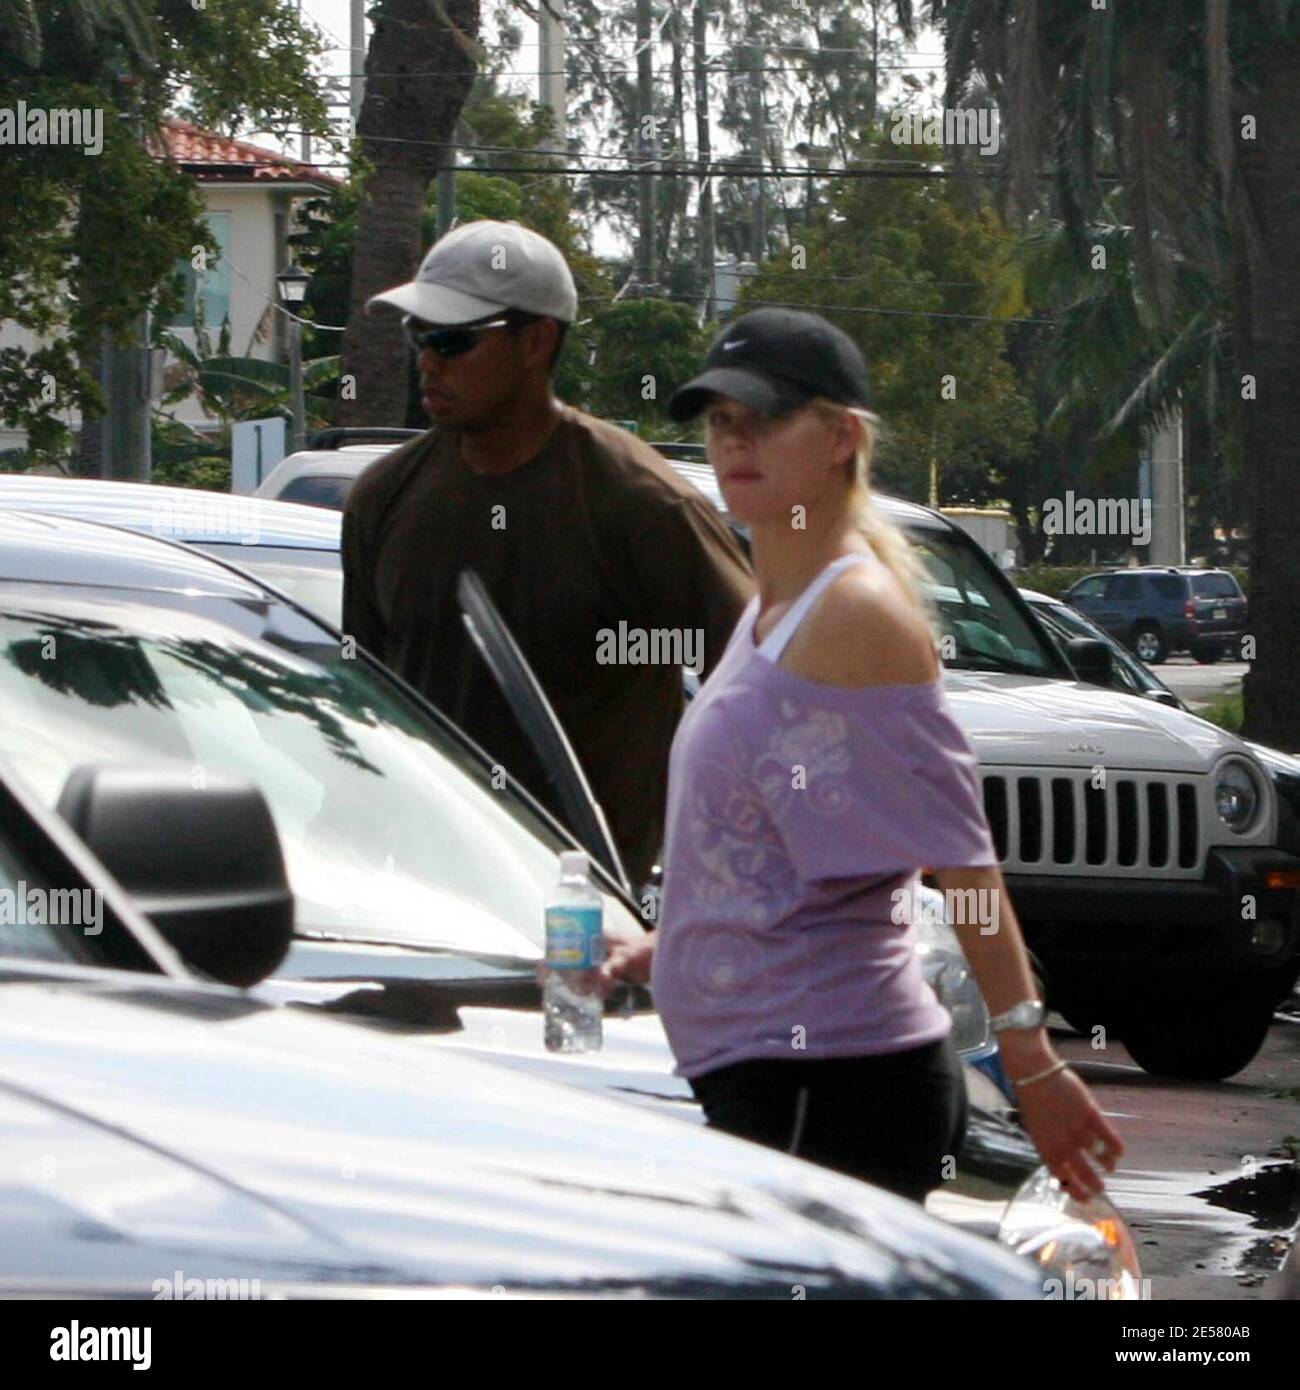 Exclusive!! Golfing superstar Tiger Woods and wife Elin take a break from their yacht 'Privacy' to go to a local gym. Even though Elin is pregnant and showing, she still likes to work out and keep in shape. Miami Beach, FL, 3/25/07    [[tag]] Stock Photo